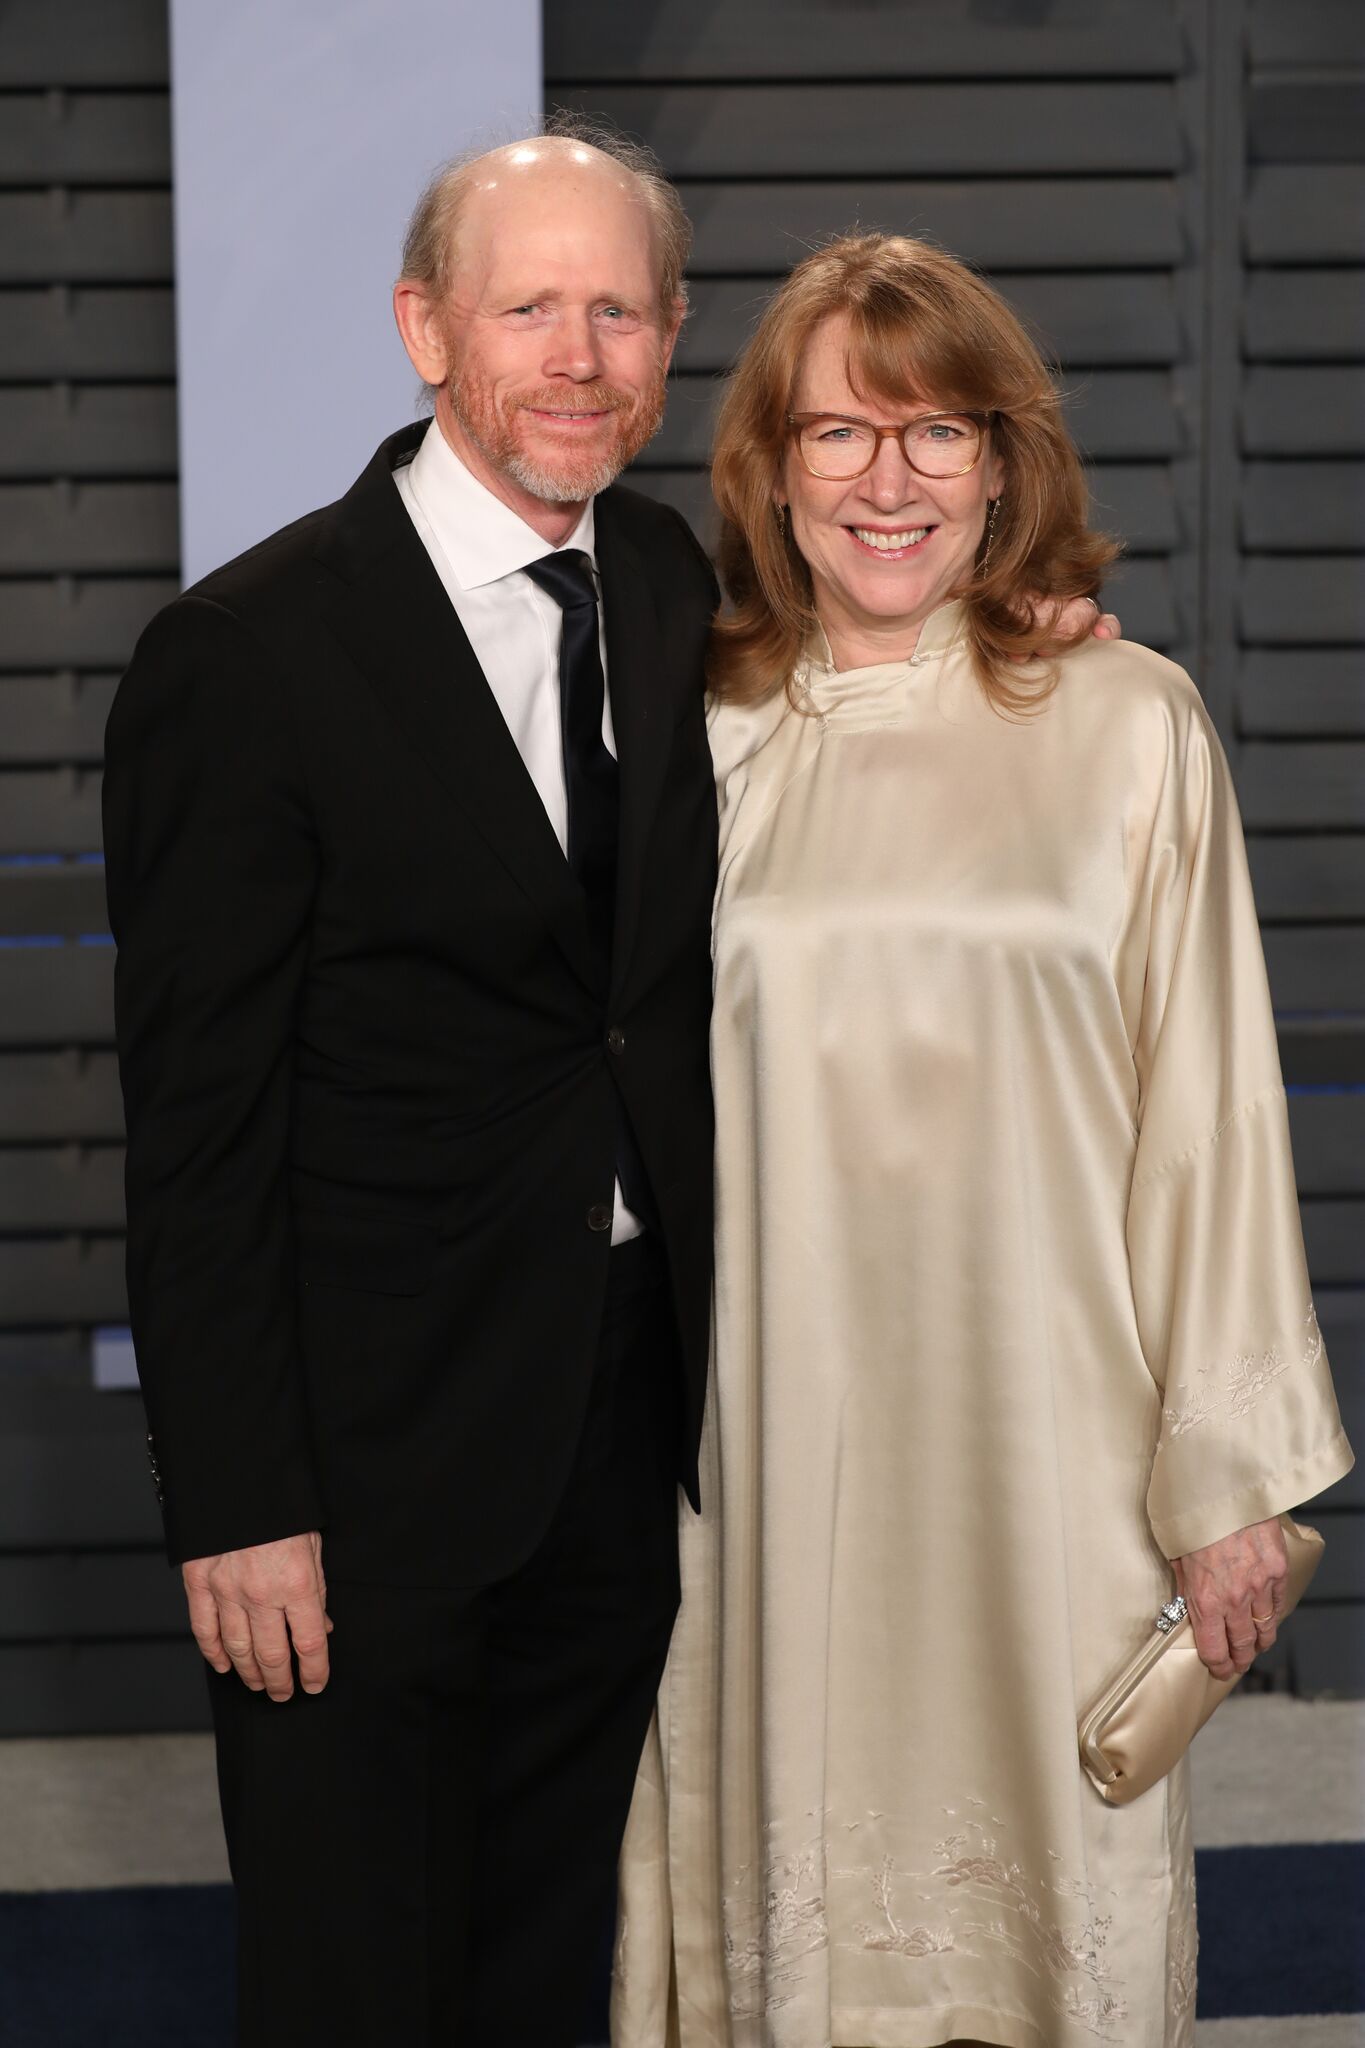 Ron Howard and Cheryl Howard attend the 2018 Vanity Fair Oscar Party hosted by Radhika Jones. | Source: Getty Images